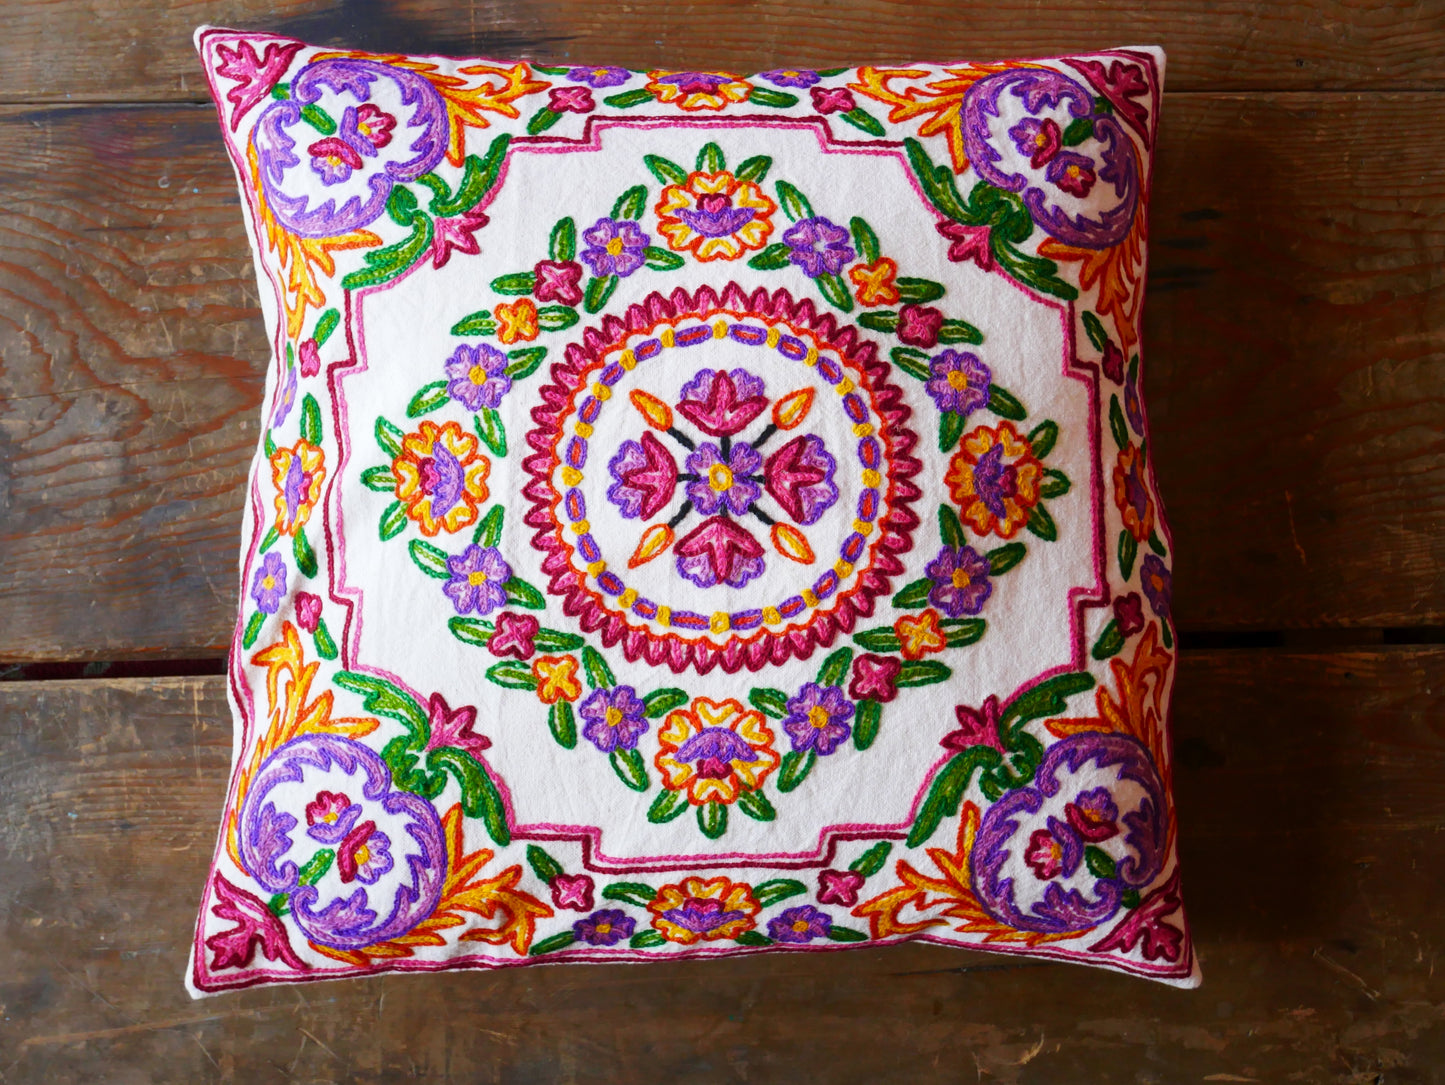 Kashmiri large pillow "Shanti" 24" cushion cover | For floor seating spaces hand embroidered - Cover only